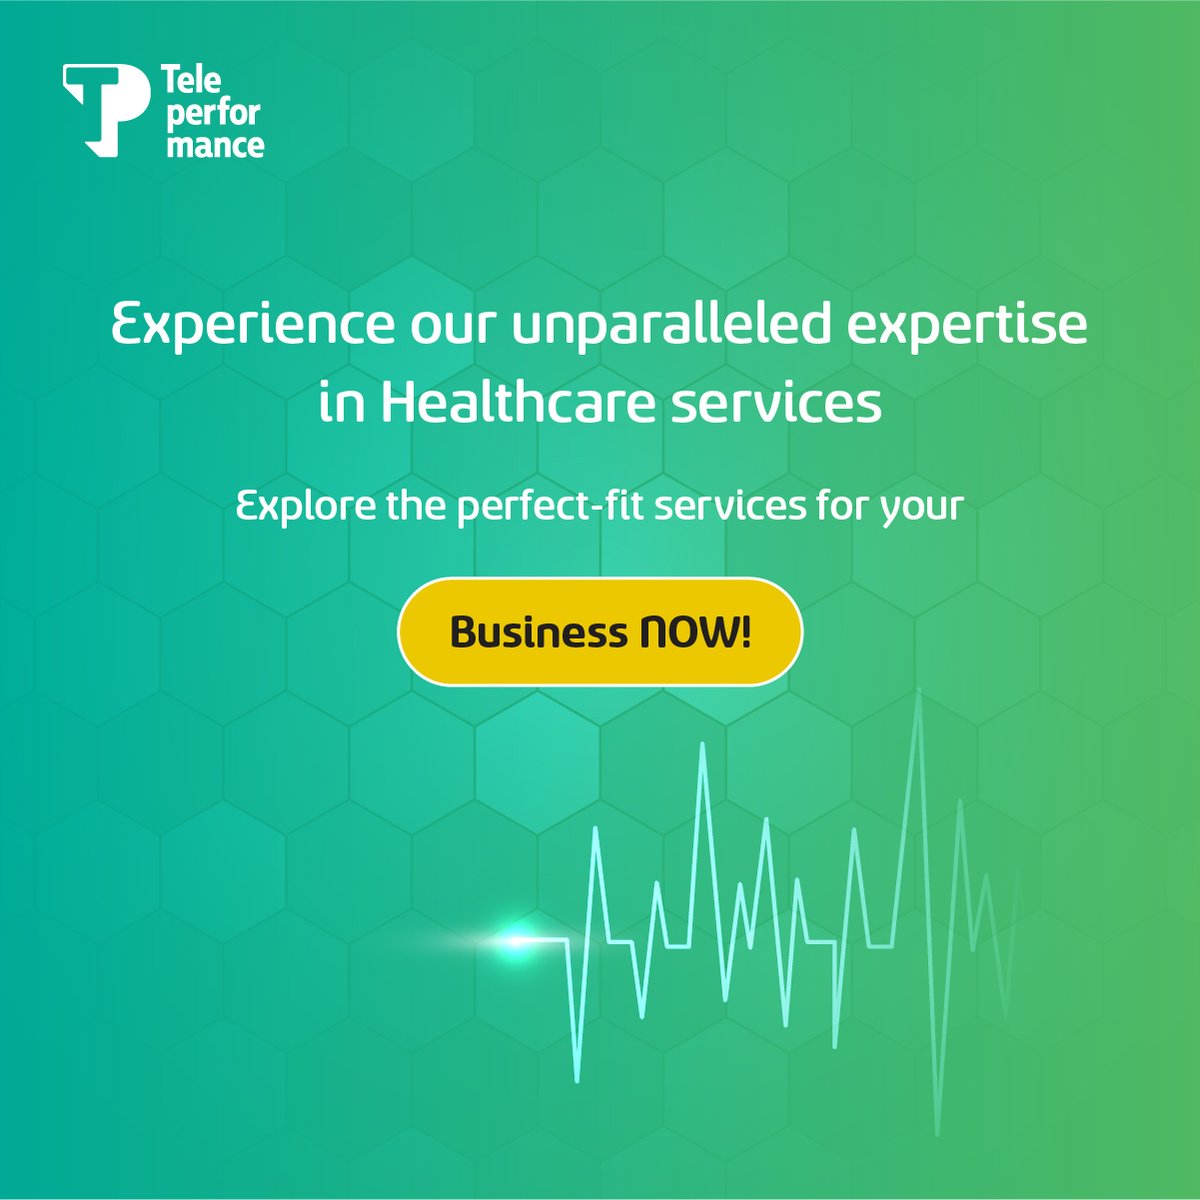 Explore our suite of healthcare solutions powered by cutting-edge technology & streamline your operations to drive excellence in patient care. Connect with our advisors today - bit.ly/TP-healthcare #Healthcare #PatientCare #TPIndia #Outsourcing #GrowWithTP